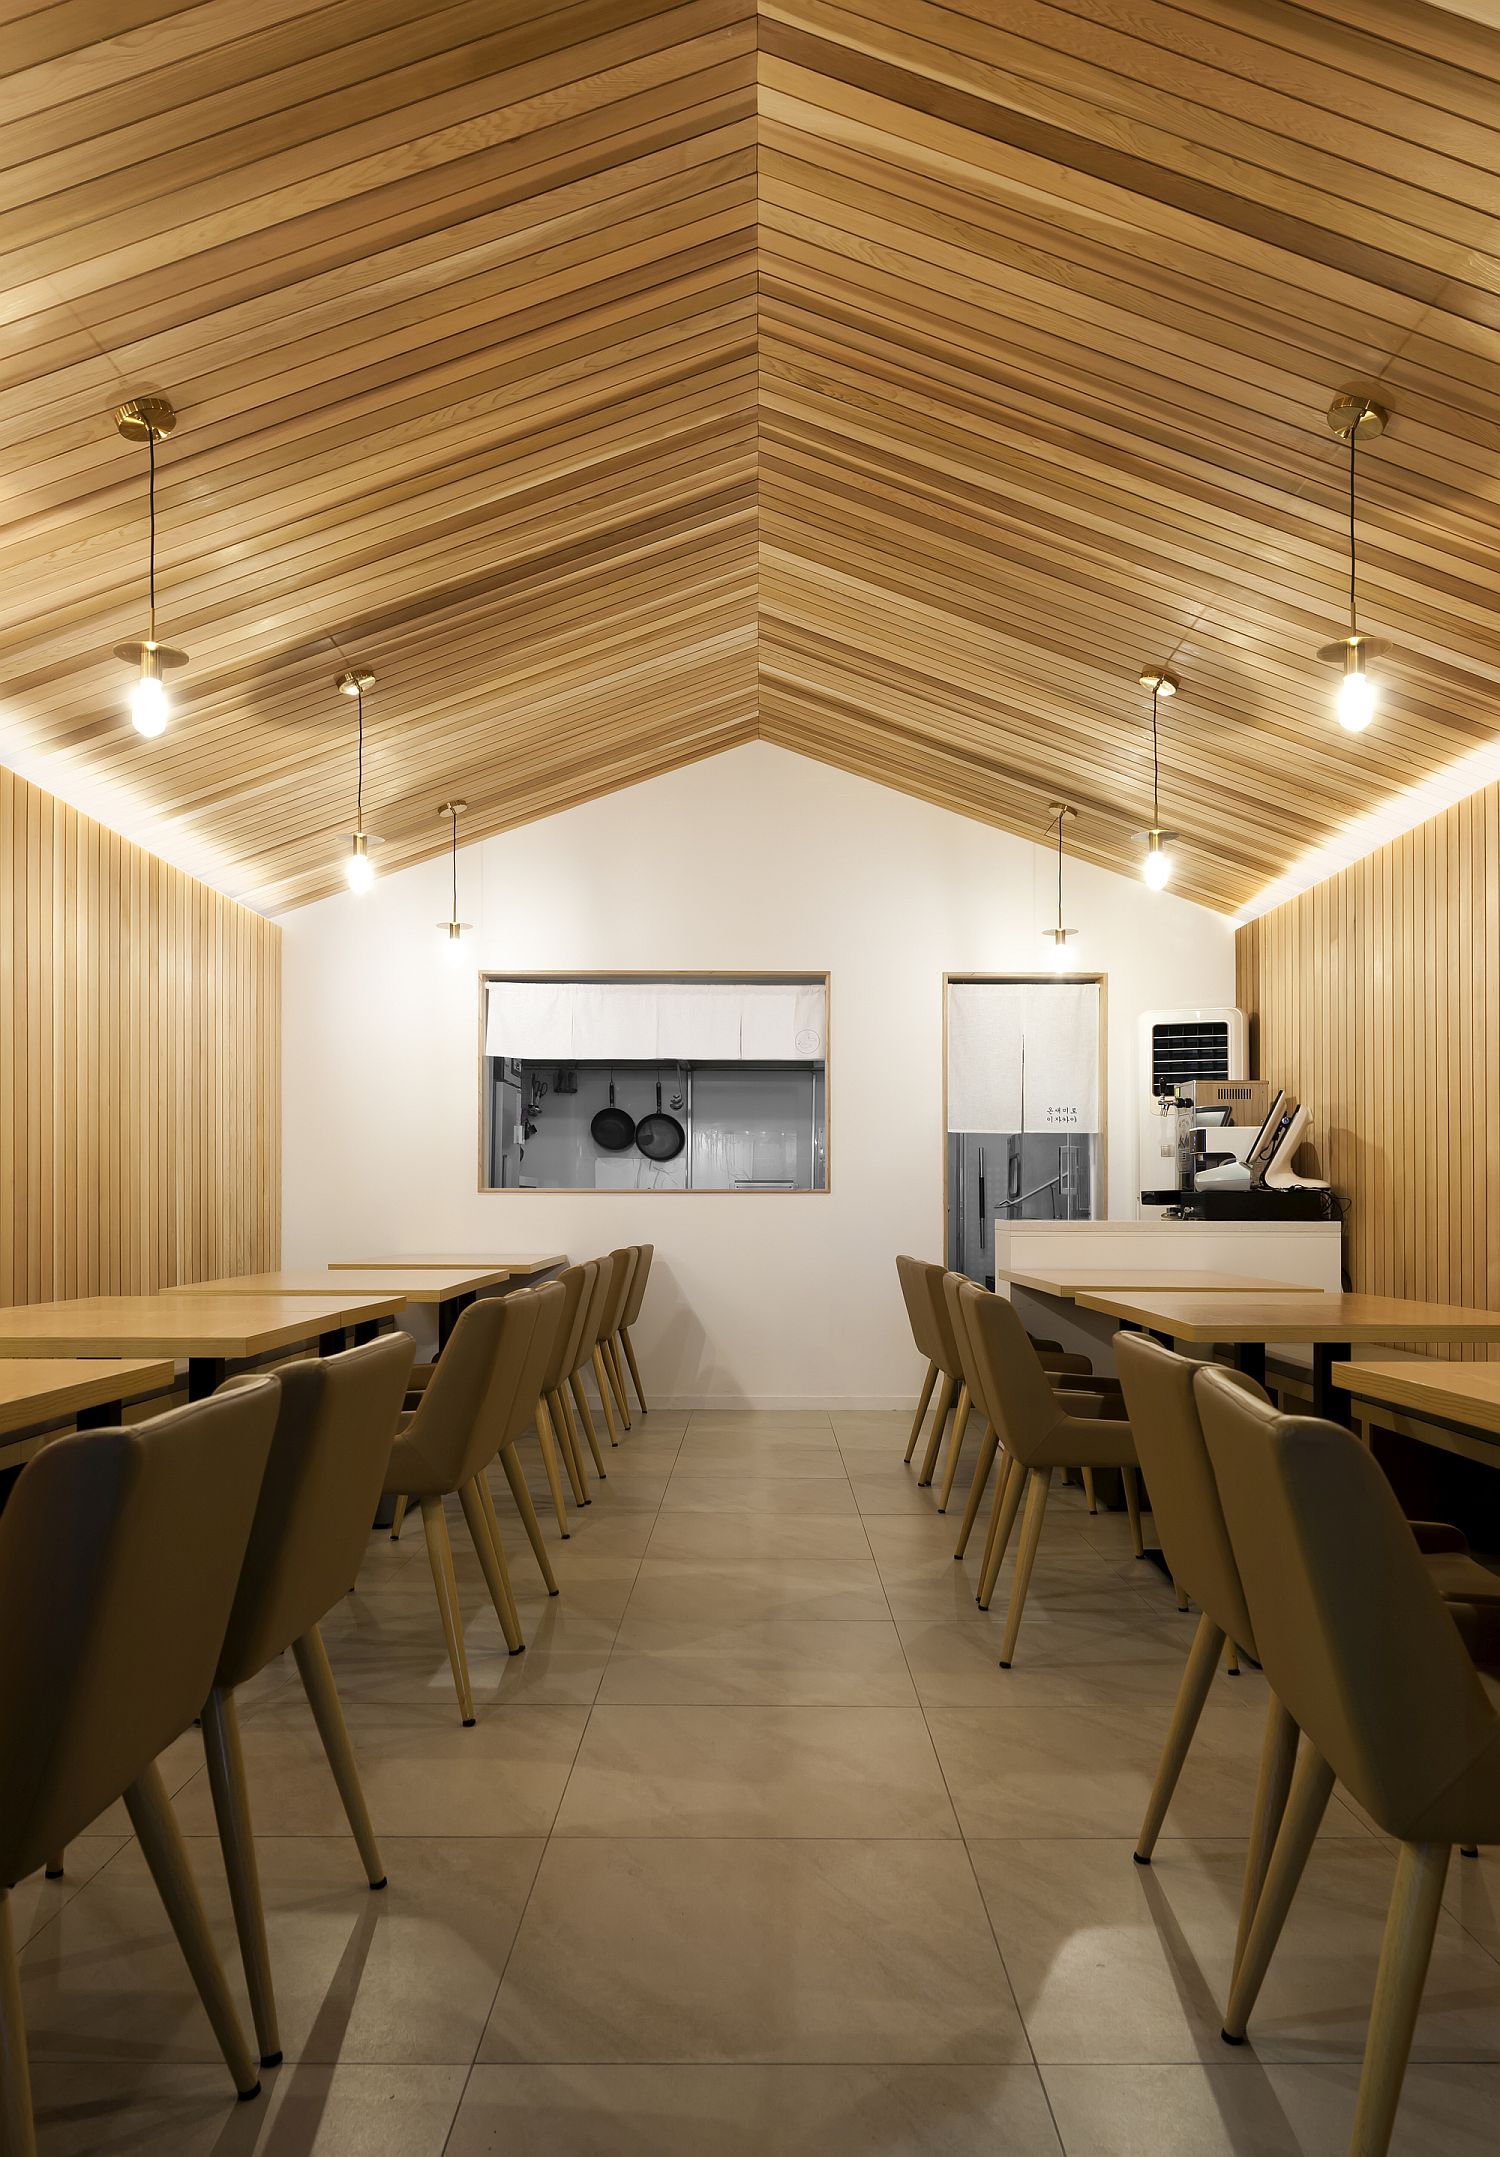 Gabled-roof-form-creates-more-space-visually-inside-the-restaurant